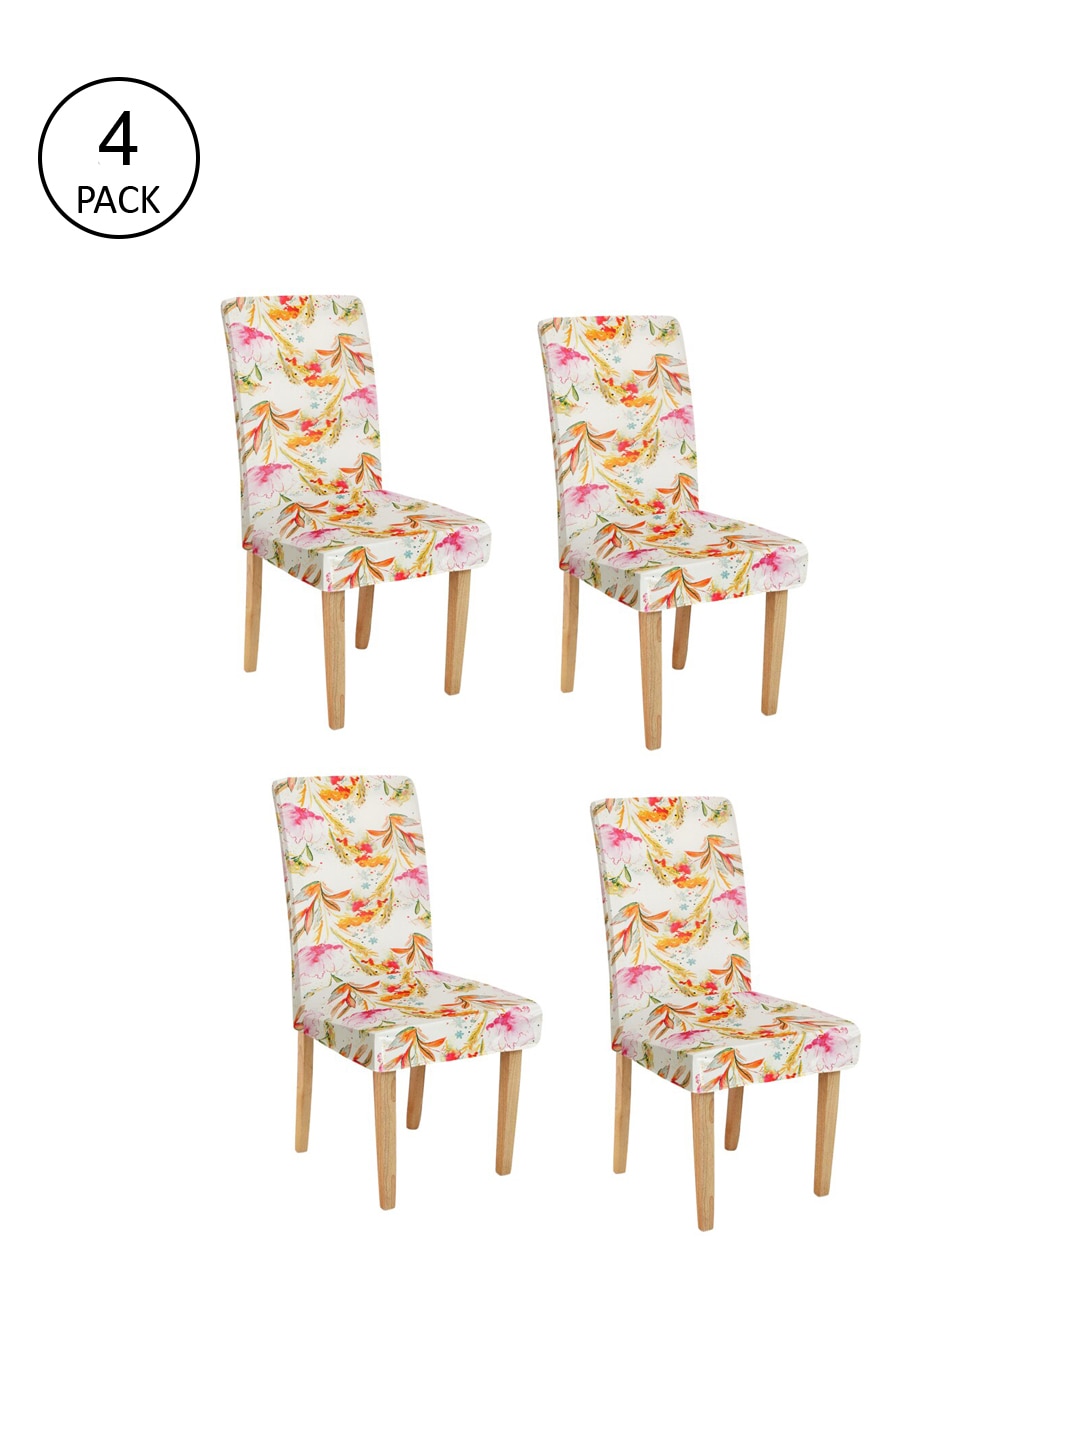 Rajasthan Decor Set Of 4 Cream-Coloured & Orange Printed Chair Covers Price in India